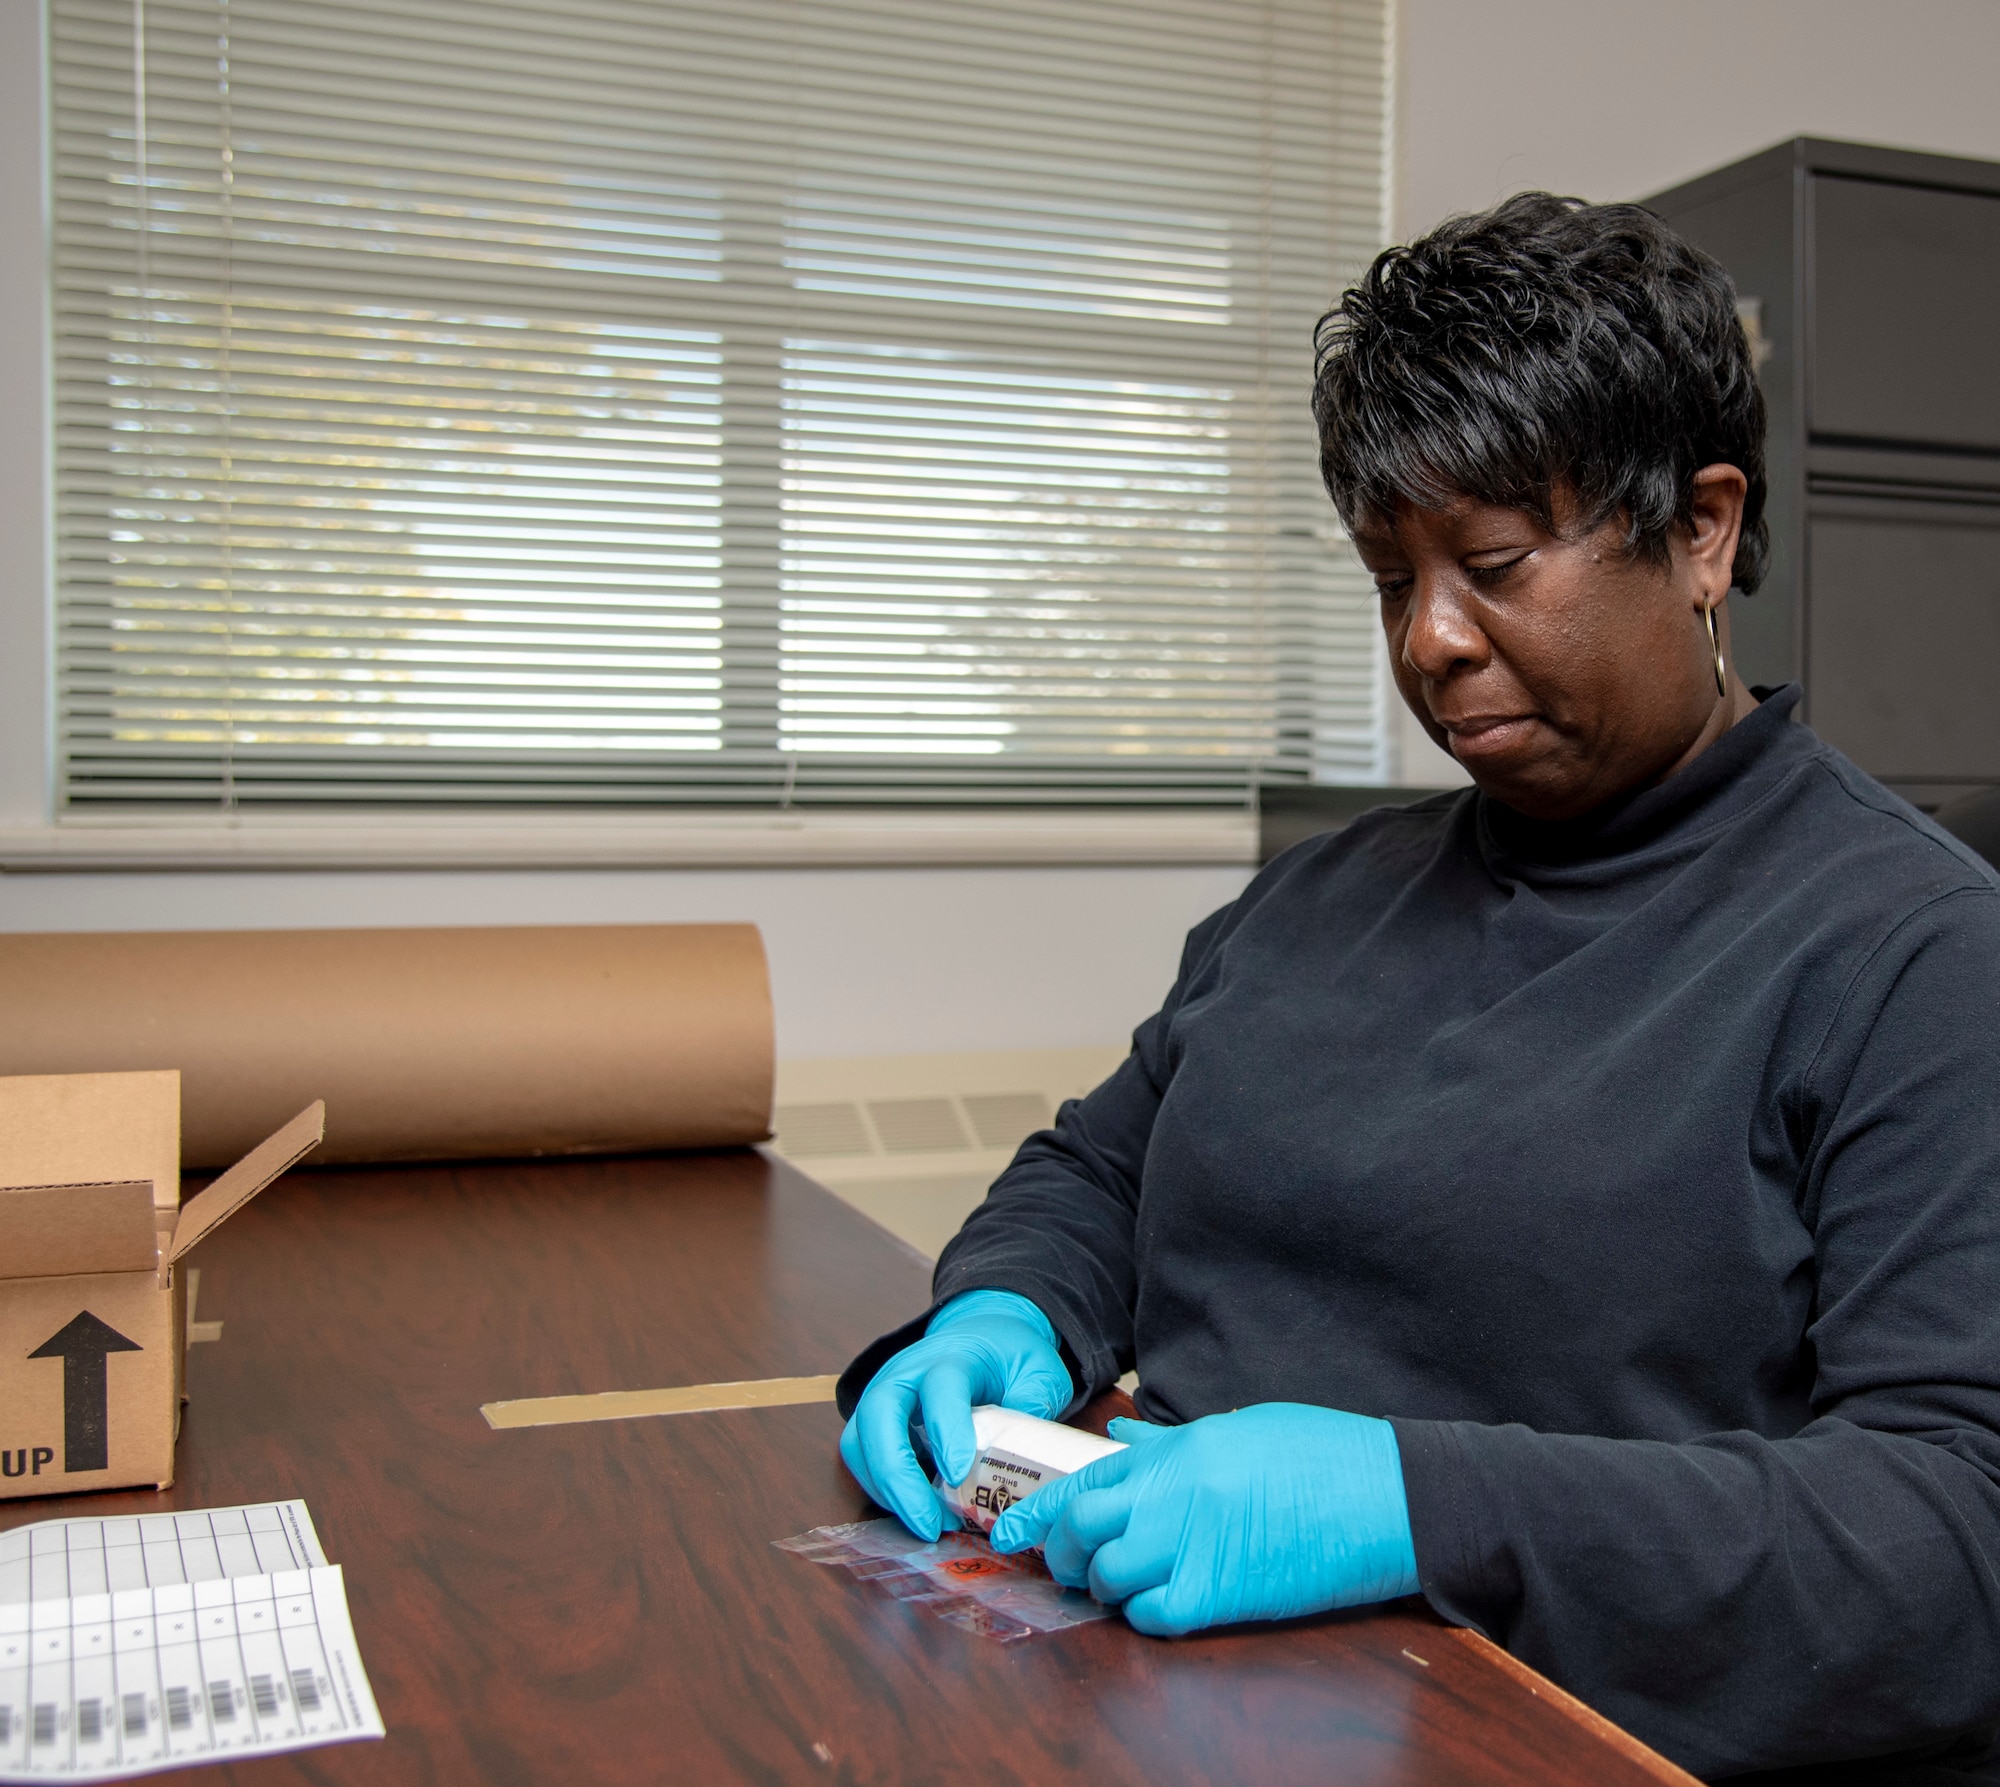 Avonda Johnson, 436th Air Wing Drug Testing Program Administrative manager, preps a urine sample for be shipped for testing November 8, 2019. The samples are shipped to the Forensic Toxicology Drug Testing Laboratory. (U.S. Air Force photo by Staff Sgt. Nicole Leidholm)